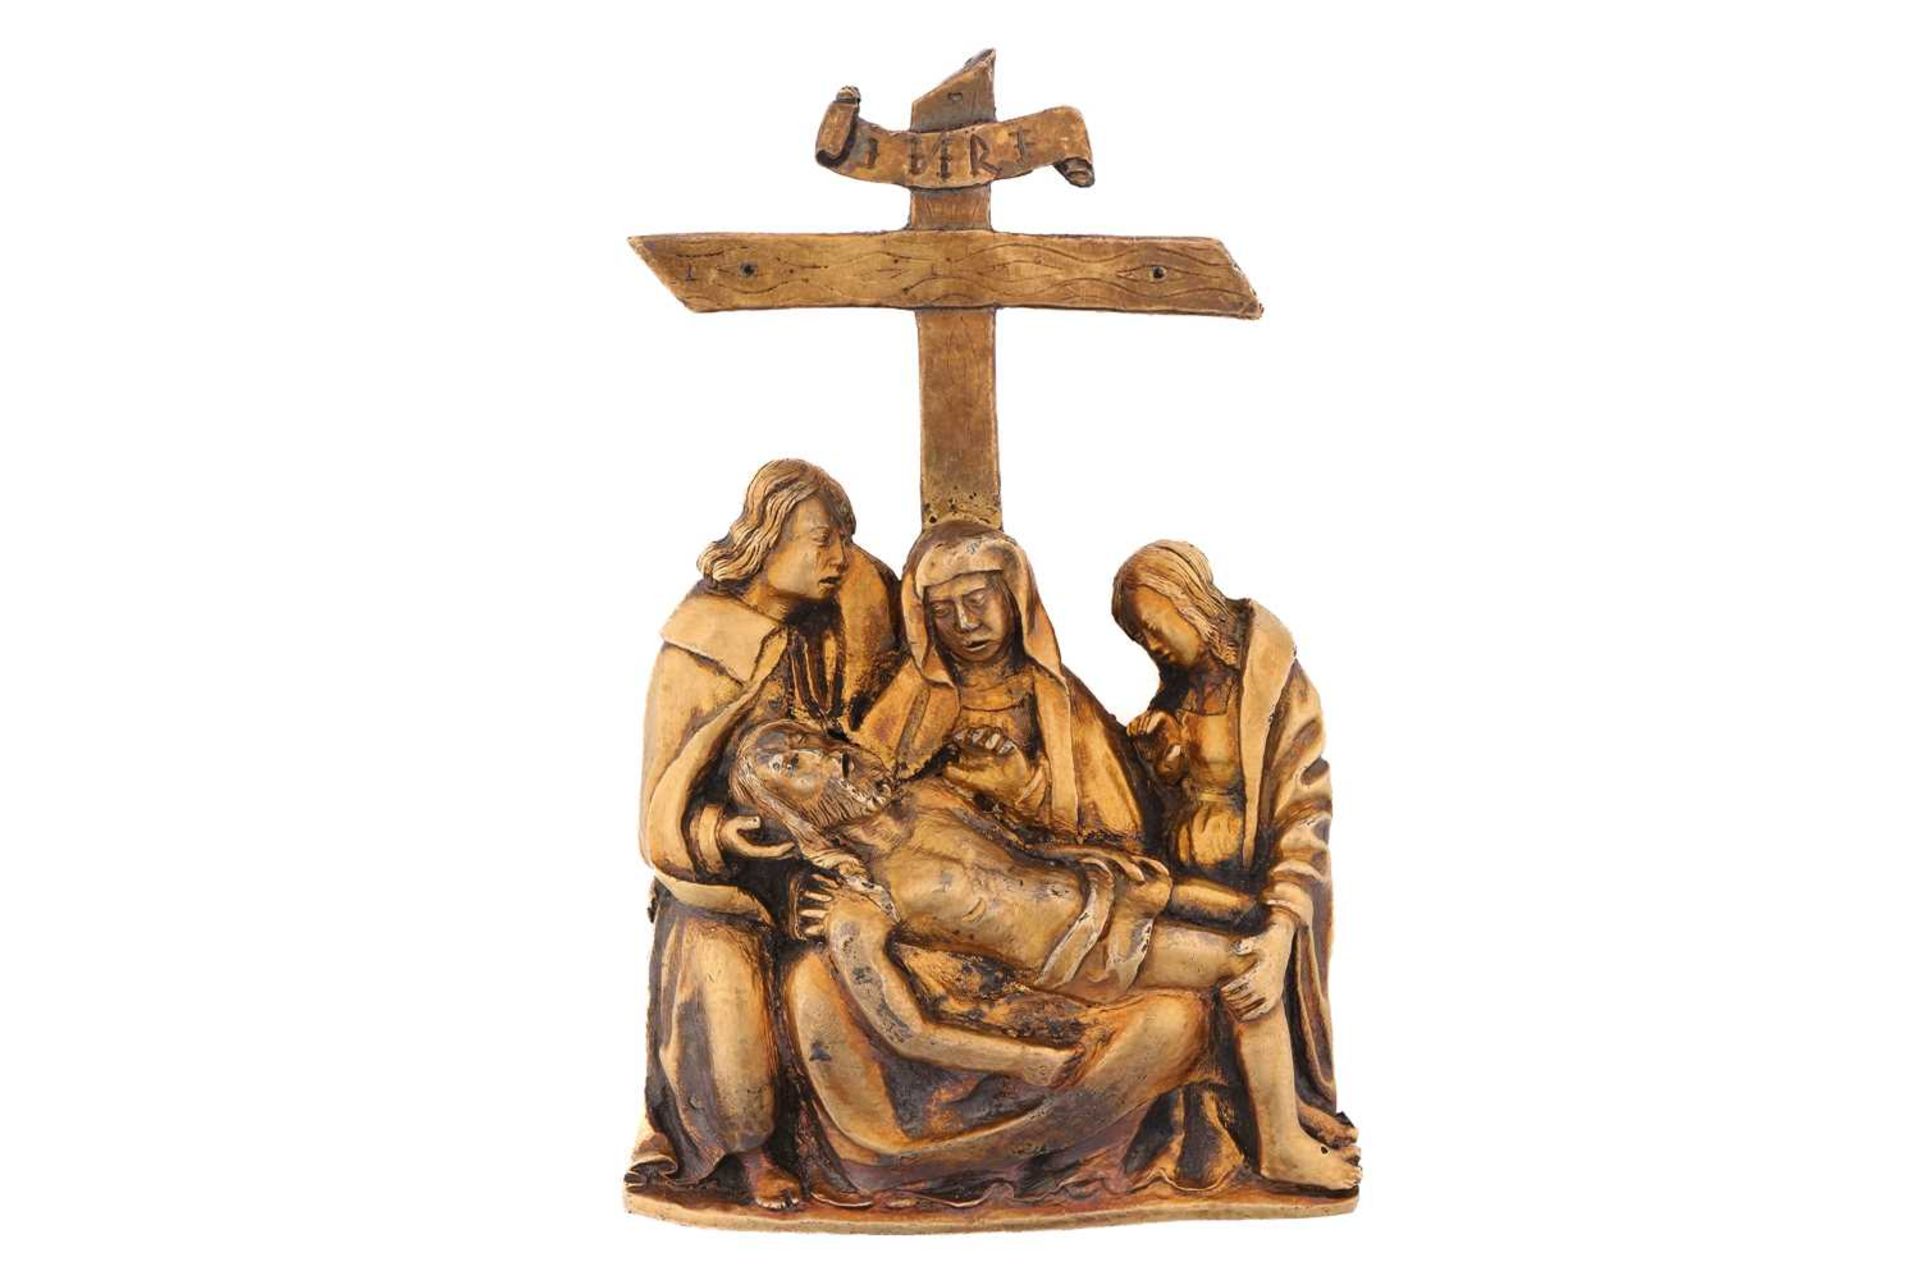 A German 15th century silver gilt mount, depicting The Lamentation Over the Dead Christ, the cross